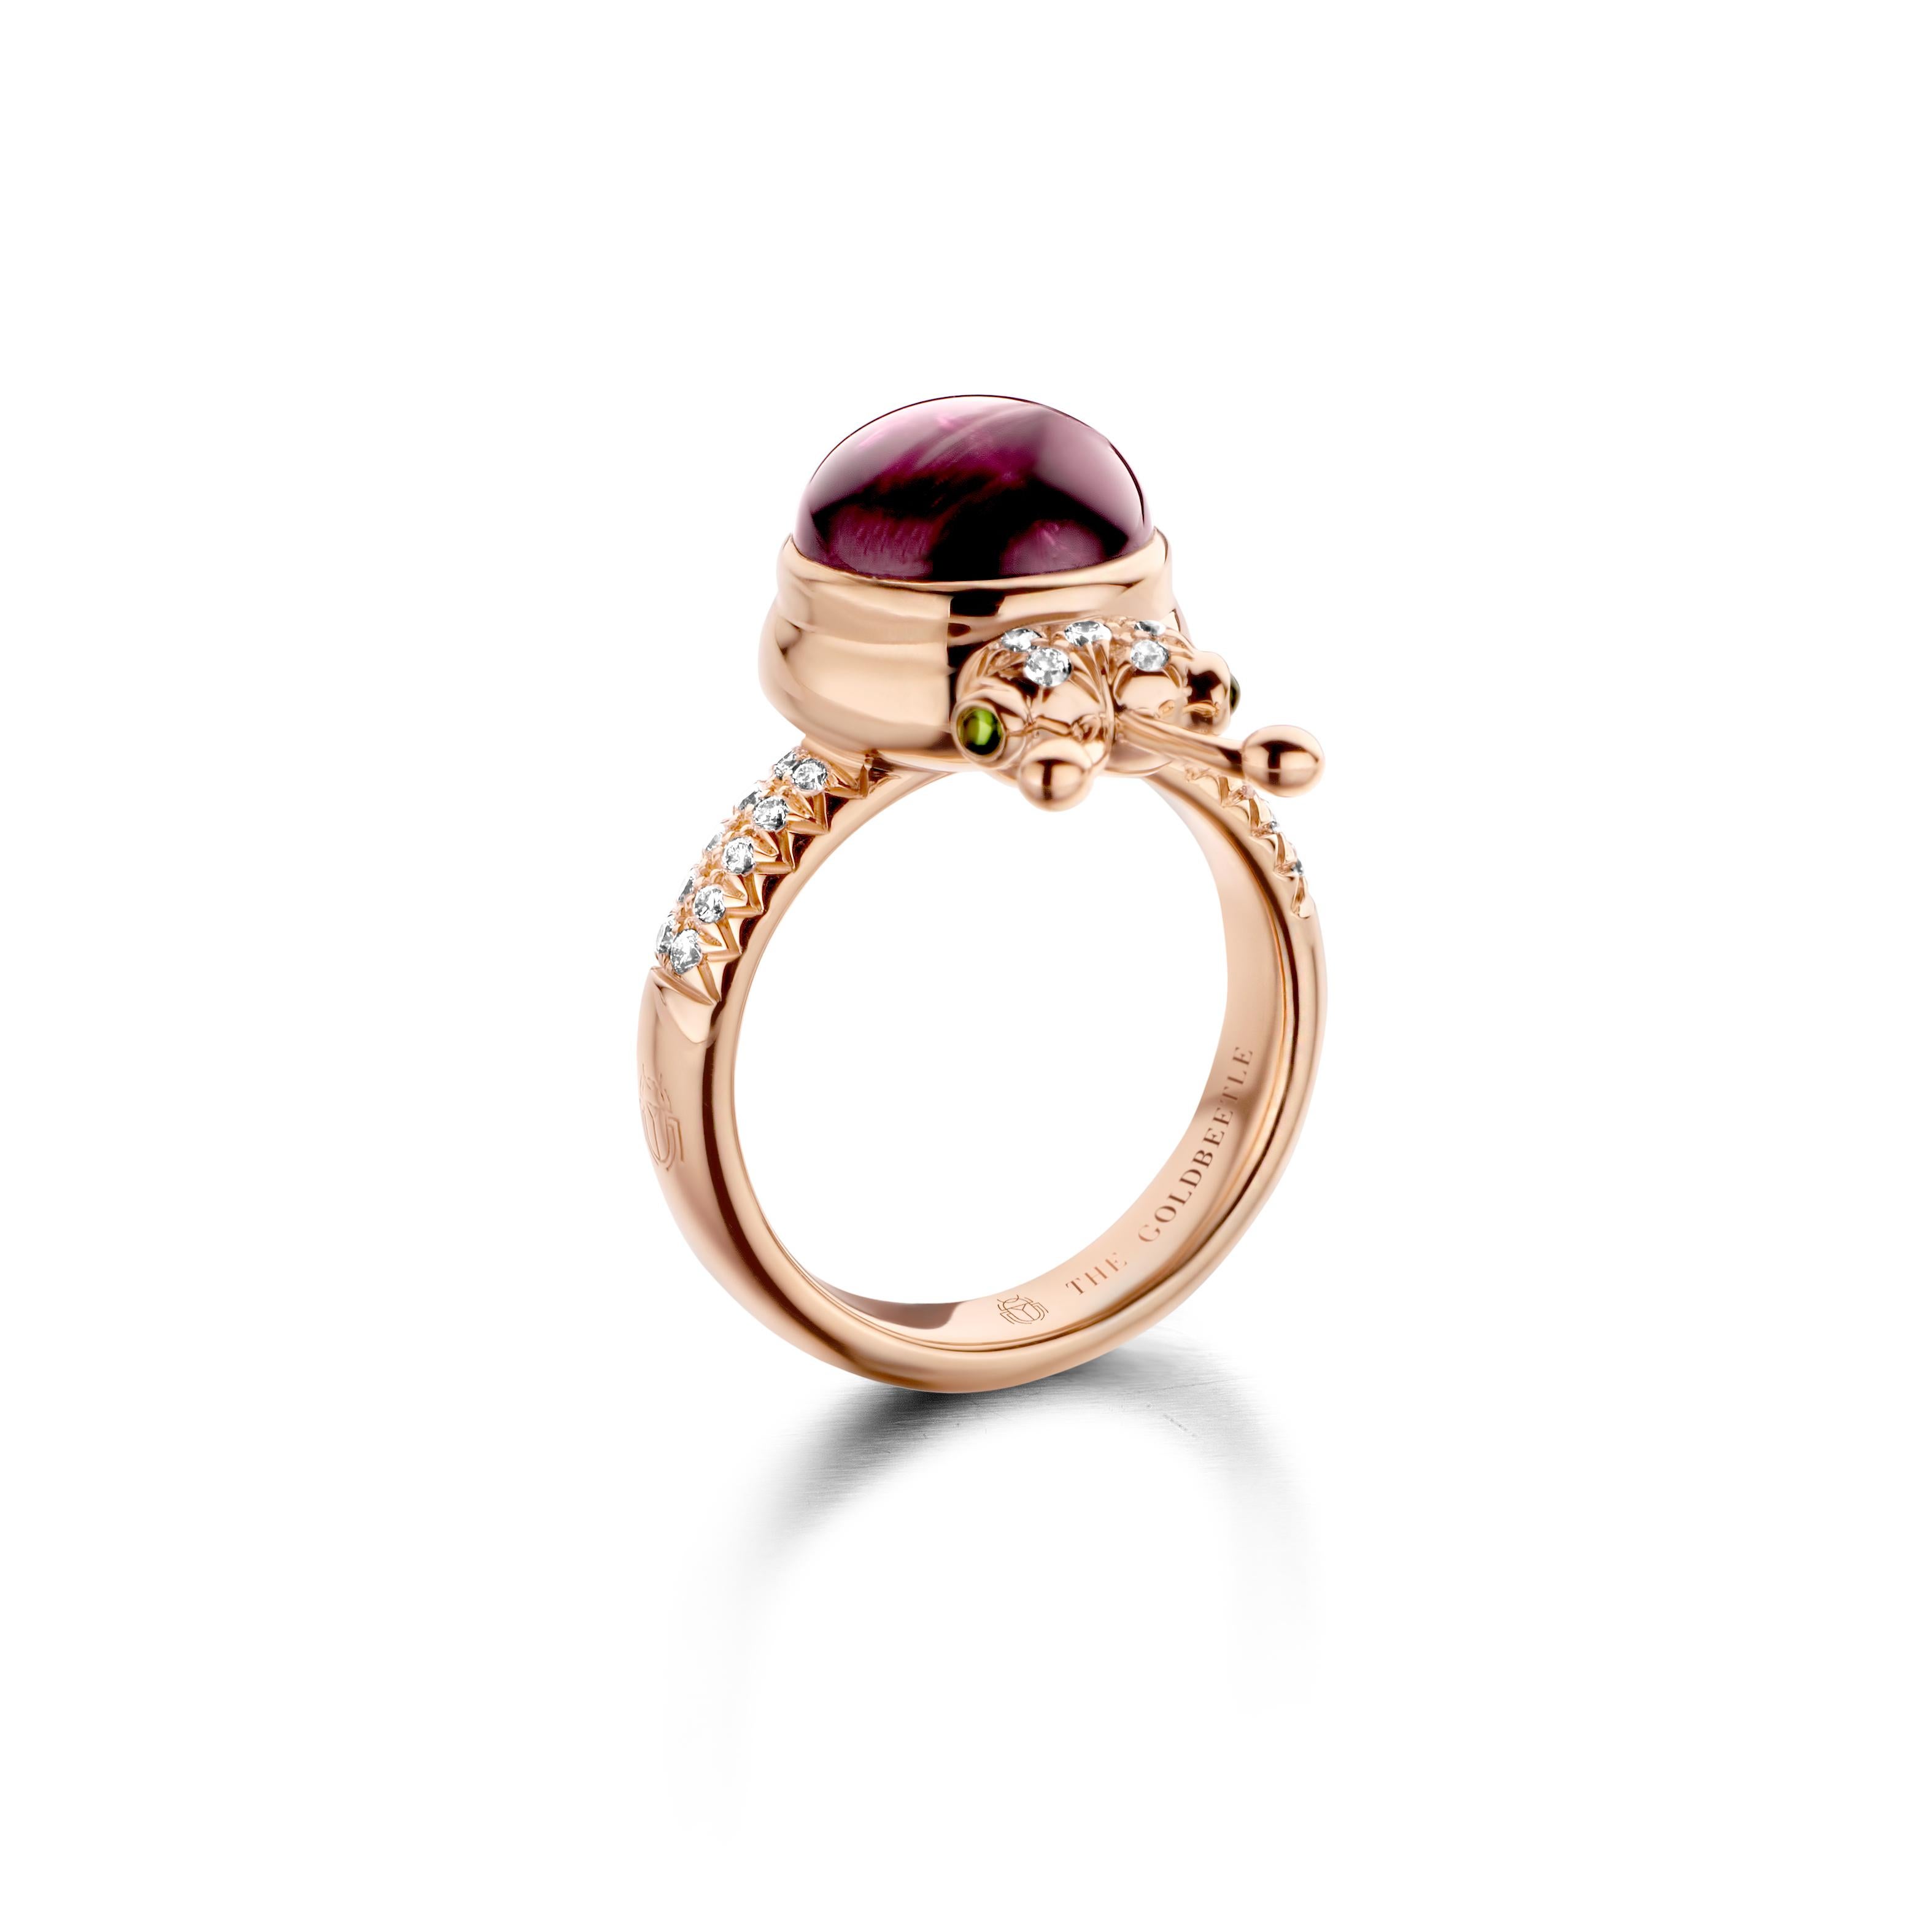 One of a kind lucky beetle ring in 18K rose gold 10g set with the finest diamonds in brilliant cut 0,23Ct (VVS/DEF quality) one natural, royal purple garnet in round cabouchon cut 6,20Ct and two tsavorites in round cabouchon cut. 




Celine